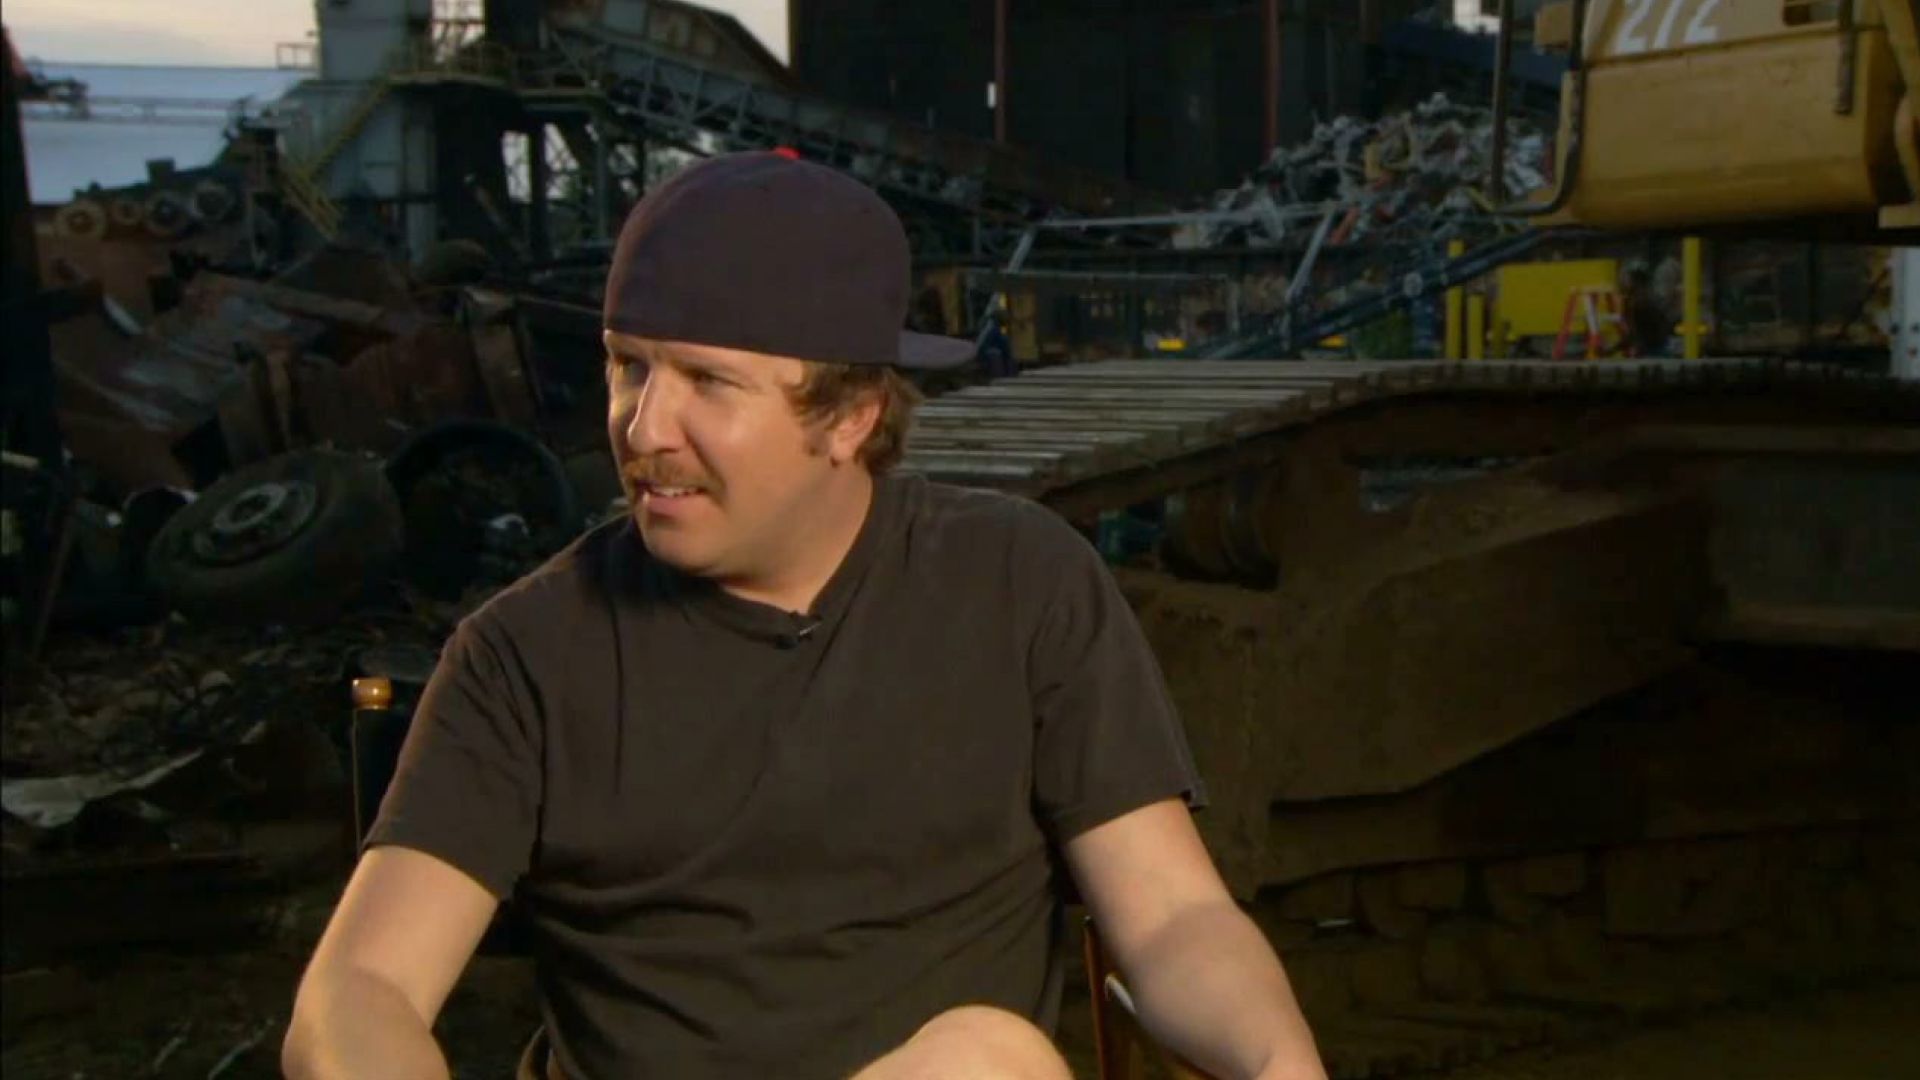 Nick Swardson on flamethrowers and working with Ruben Fleischer on 30 Minutes or Less